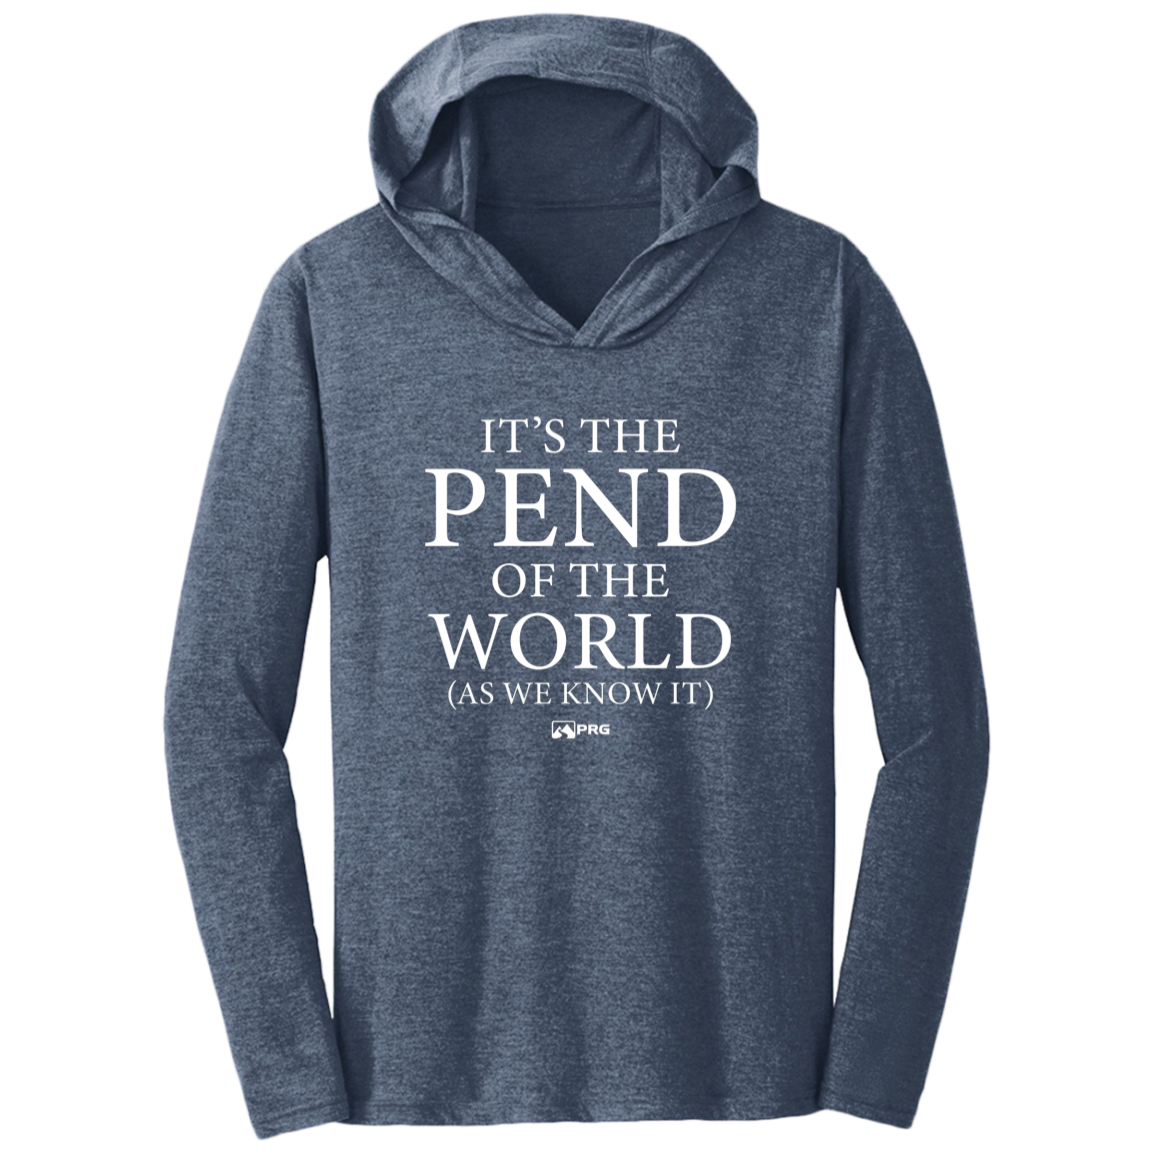 Pend of the World - Shirt Hoodie